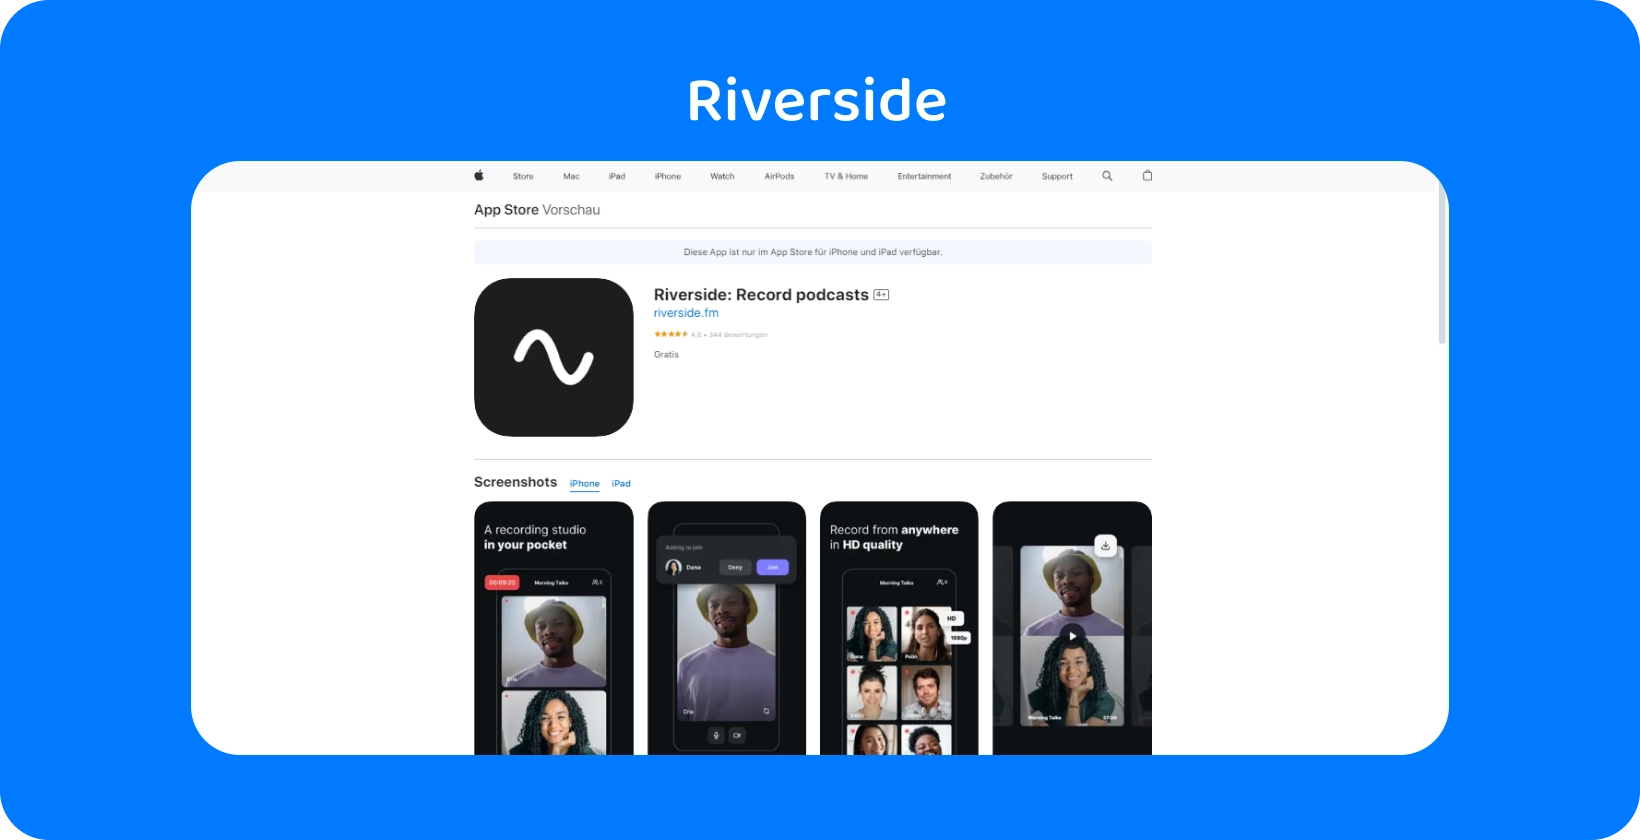 Riverside app on the App Store showing tools for high-quality podcast recording and remote interviews.